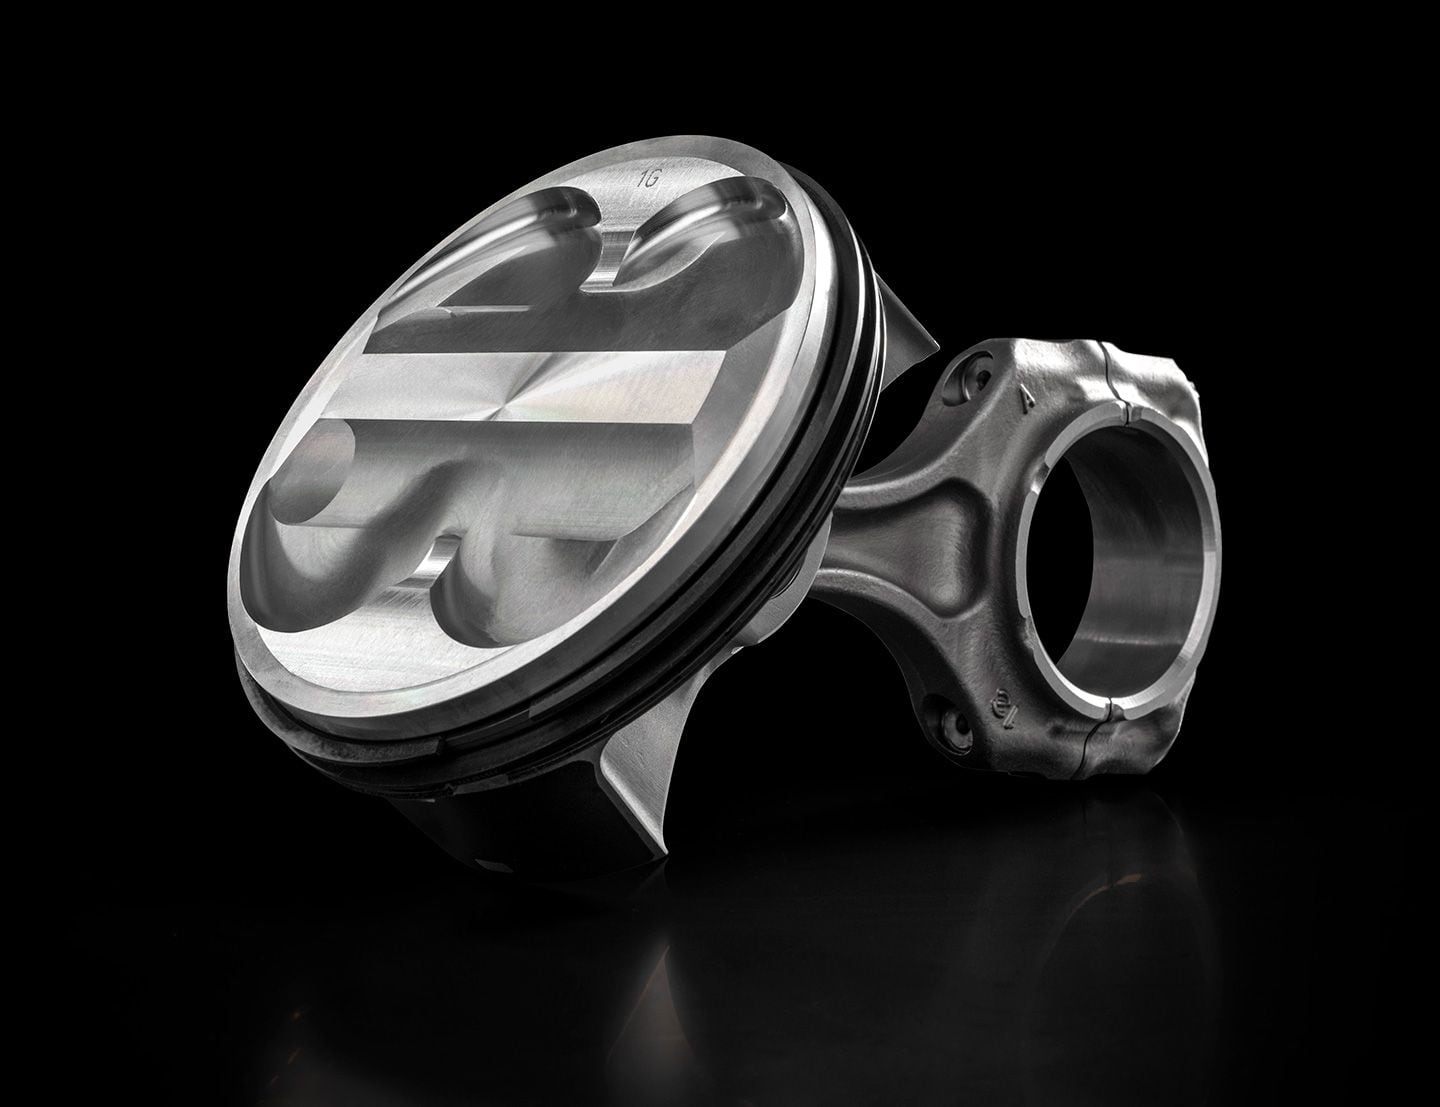 The 116mm piston atop its fracture-split connecting rod. The rod is slightly shorter than that used in the 1299 Panigale, despite the Superquadro Mono’s slightly longer stroke—62.4mm versus 60.8mm. The hidden bottom of the piston is “box-in-box” reinforced—think of a multiroom apartment below the piston crown whose walls give great strength and pick up the short wrist pin. An oil jet is aimed at piston bottom for cooling.